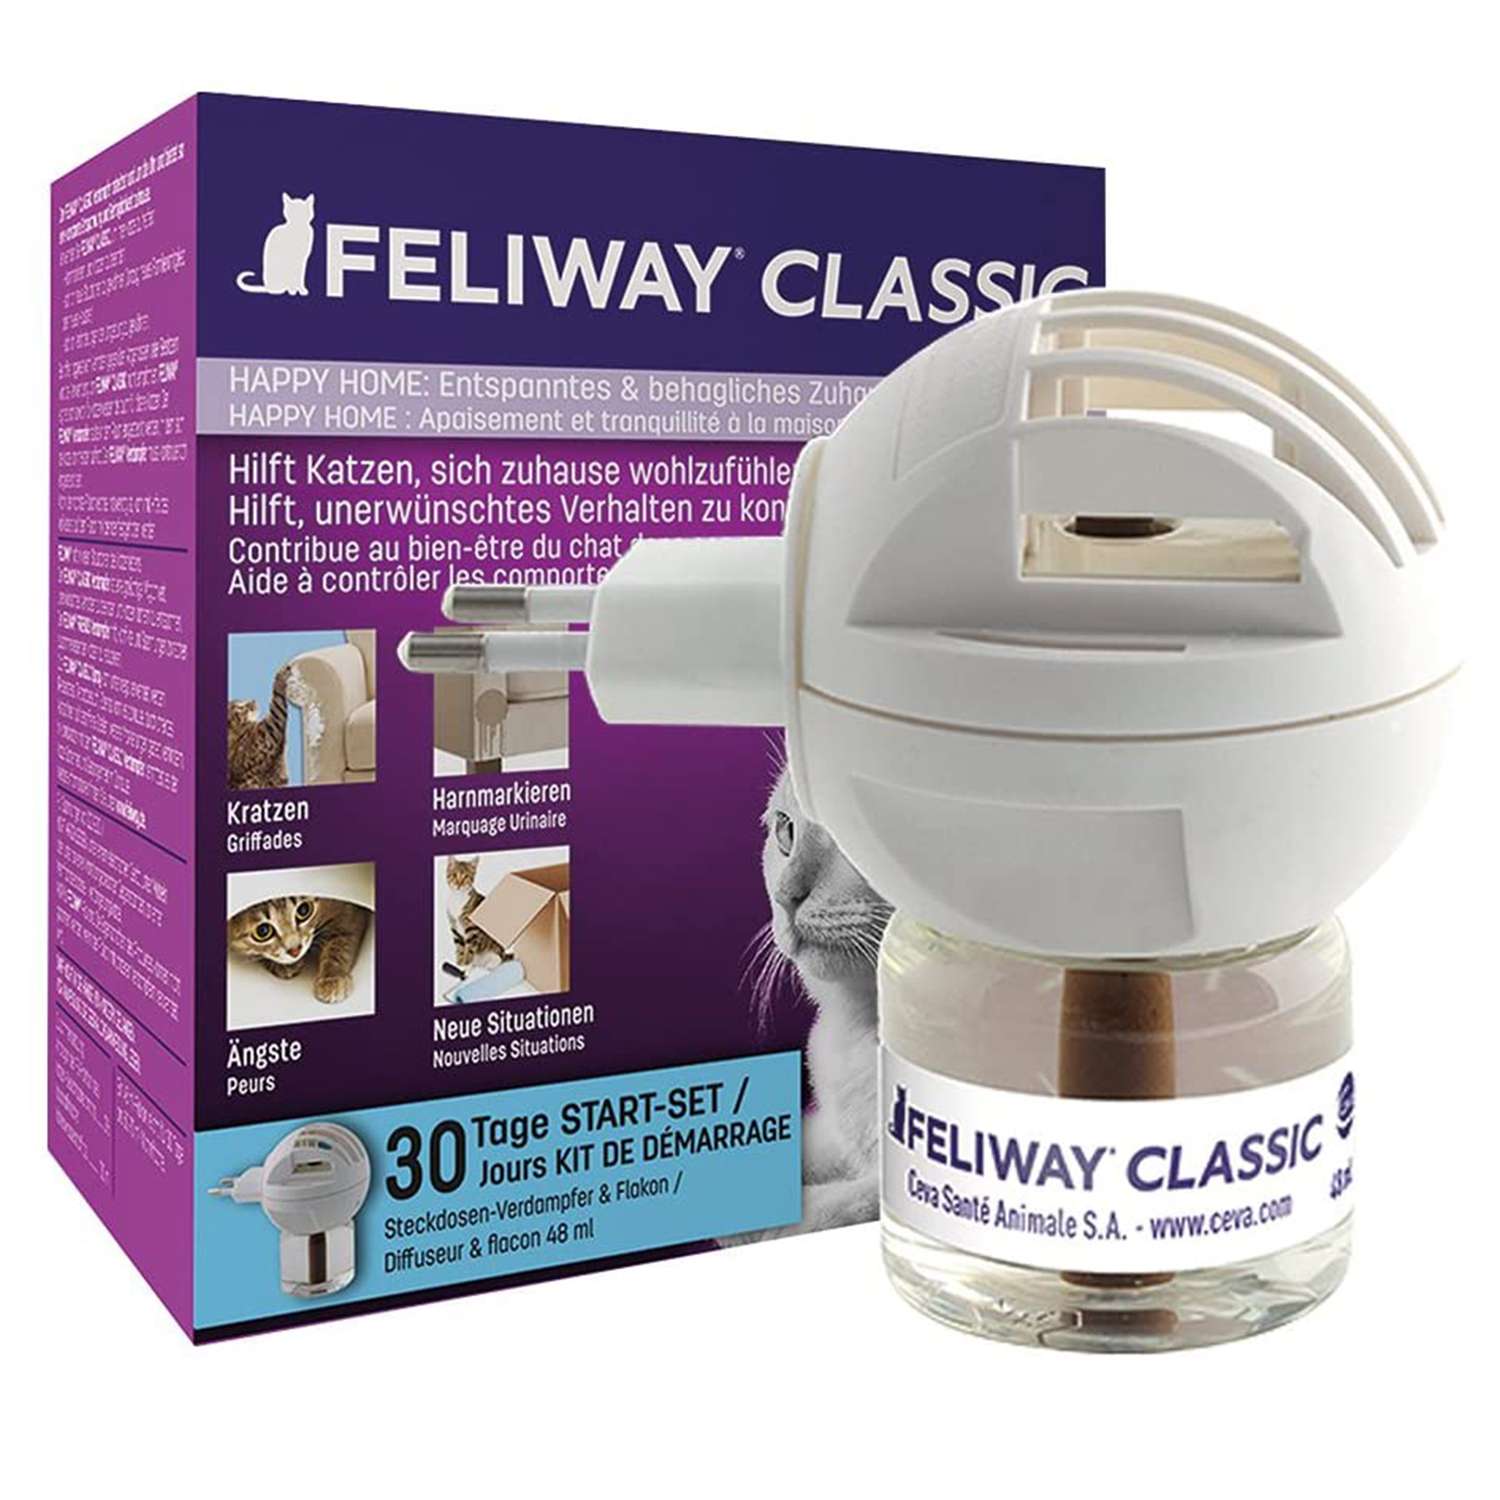 Cat Owners Love the Feliway Diffuser to Reduce Scratching, Spraying